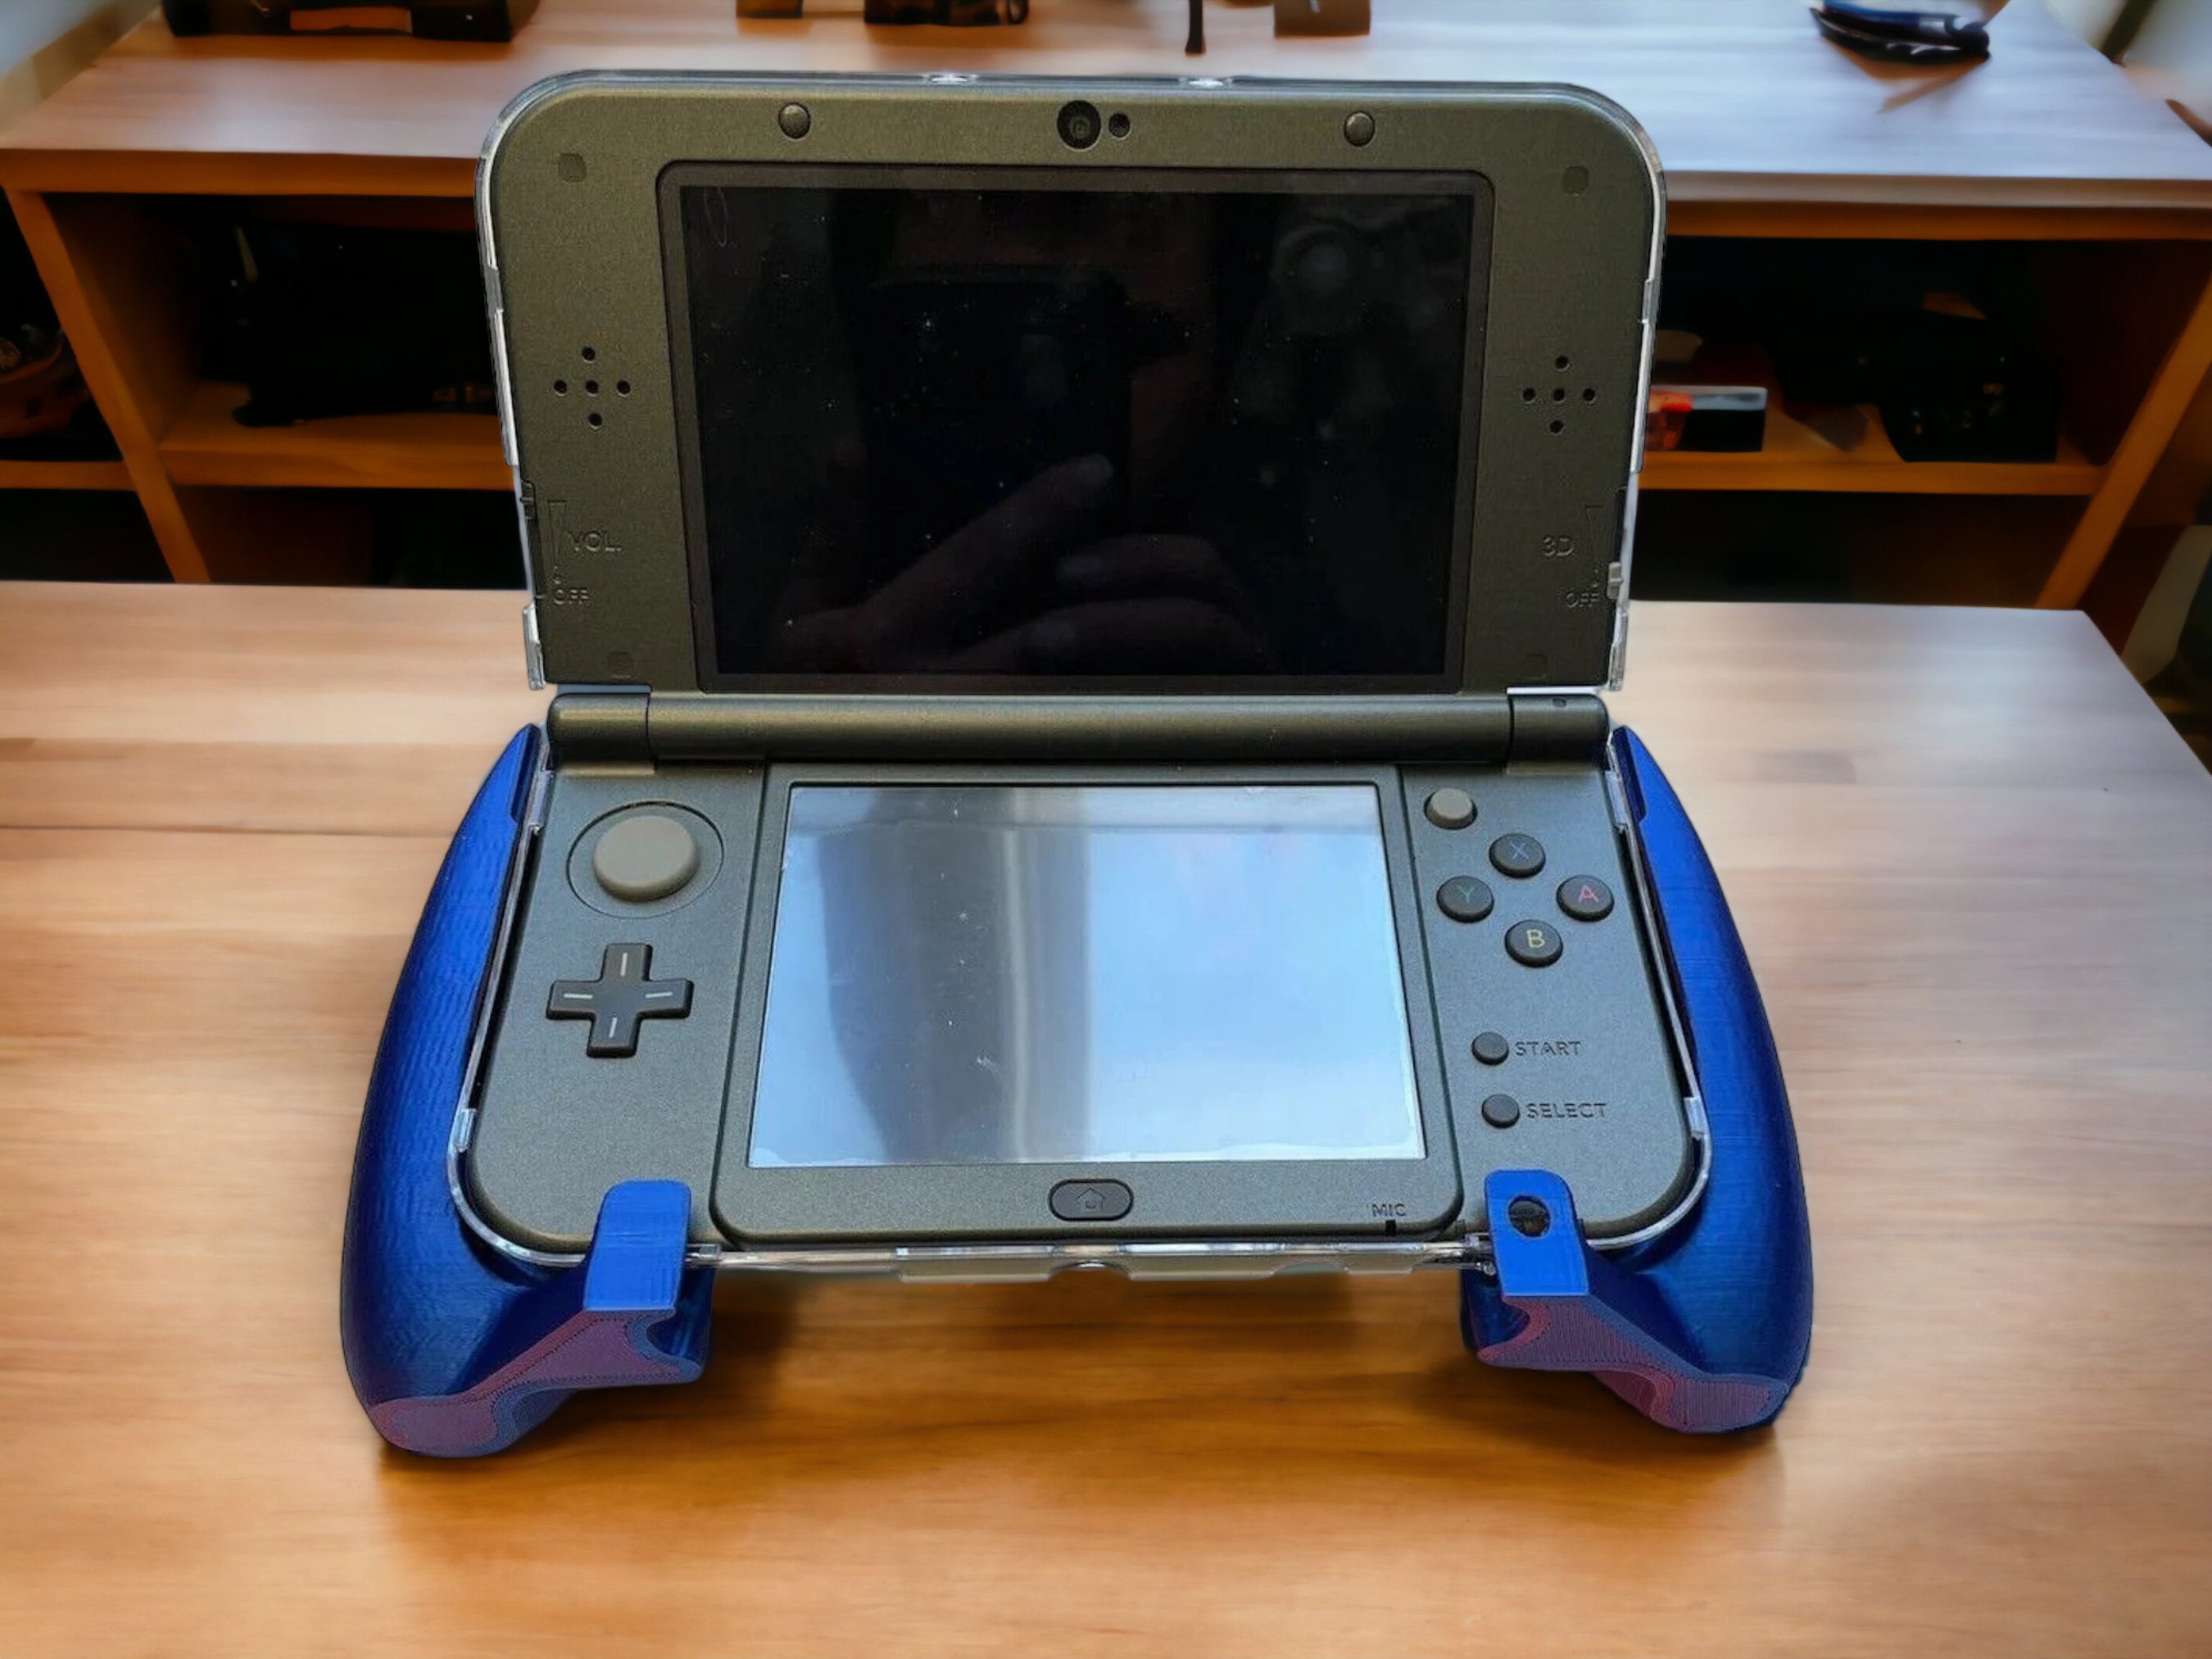 3DS Deluxe Power Grip Adds Console Handles, Extra Battery To Your Handheld